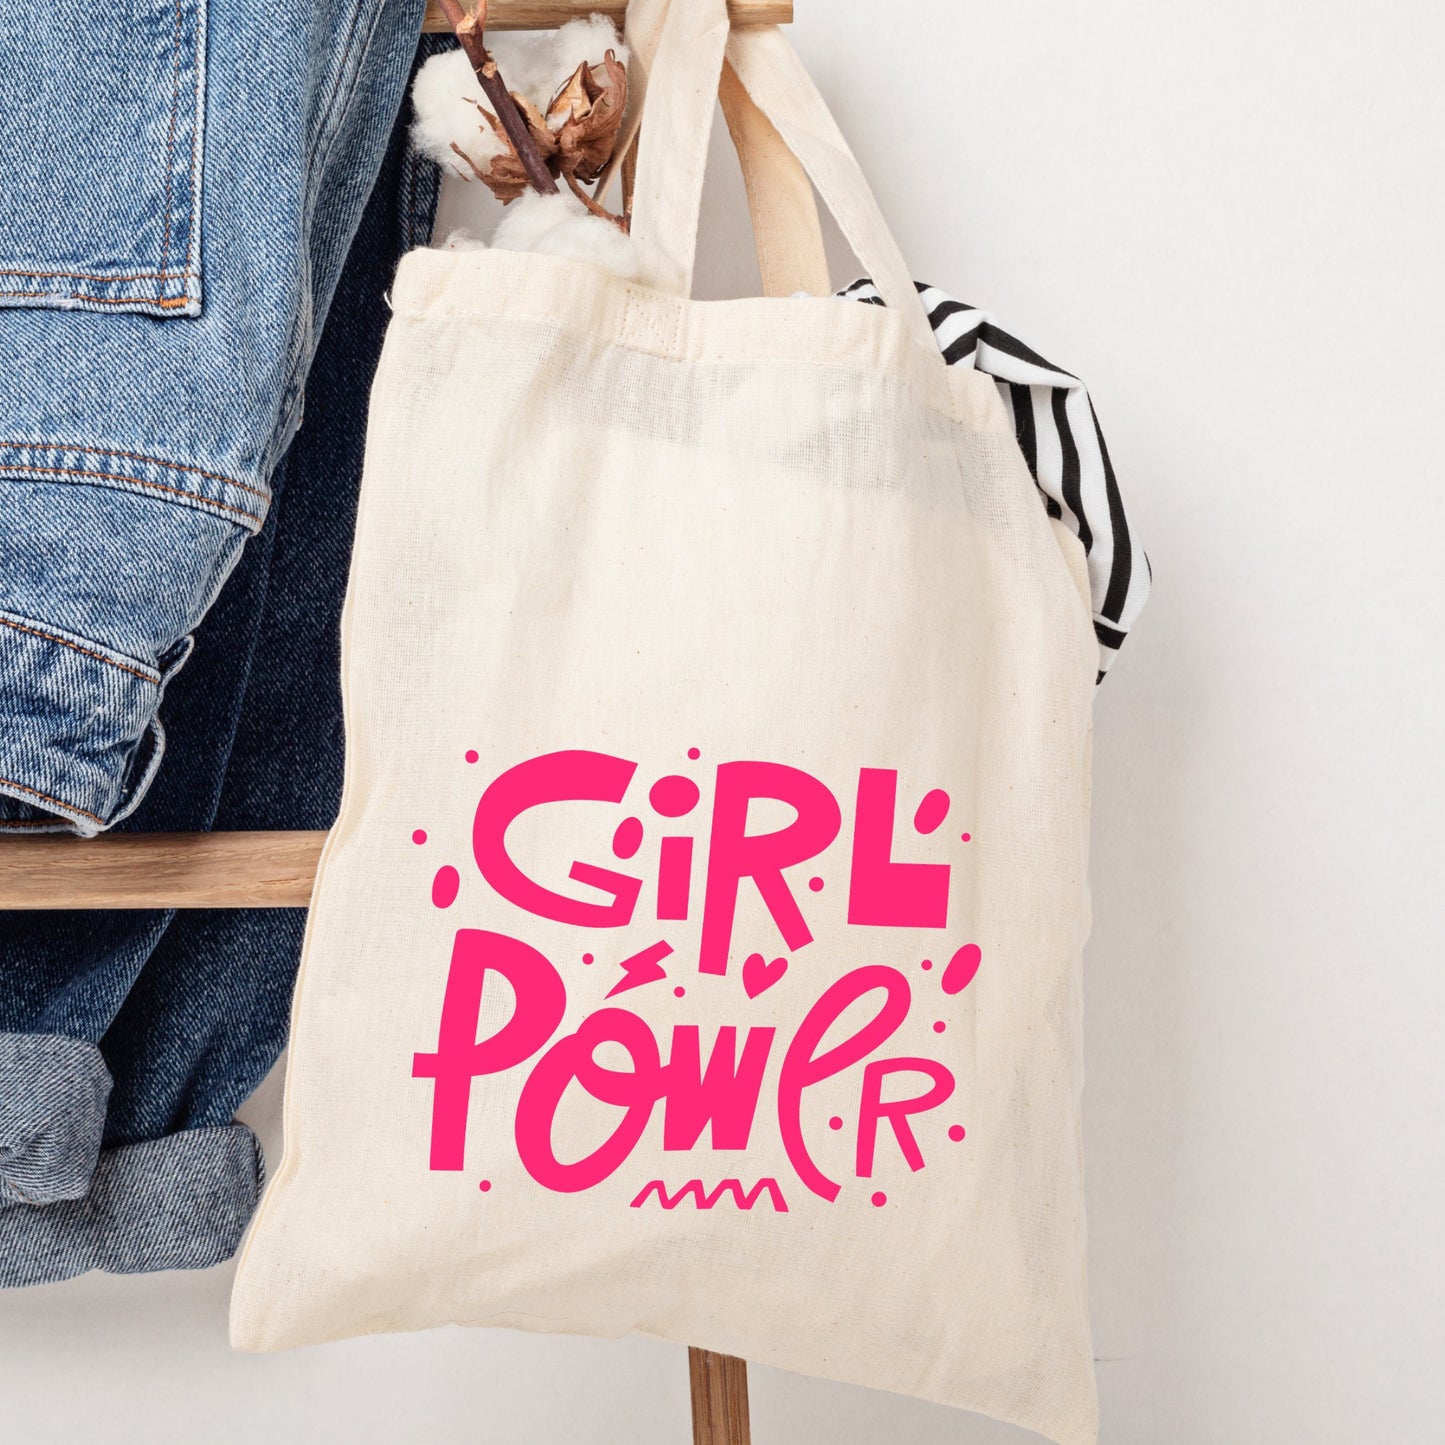 Girl Power Tote Bag, gifts for her, school/ college / uni bag, stocking fillers, teenage daughter, neice Christmas gift